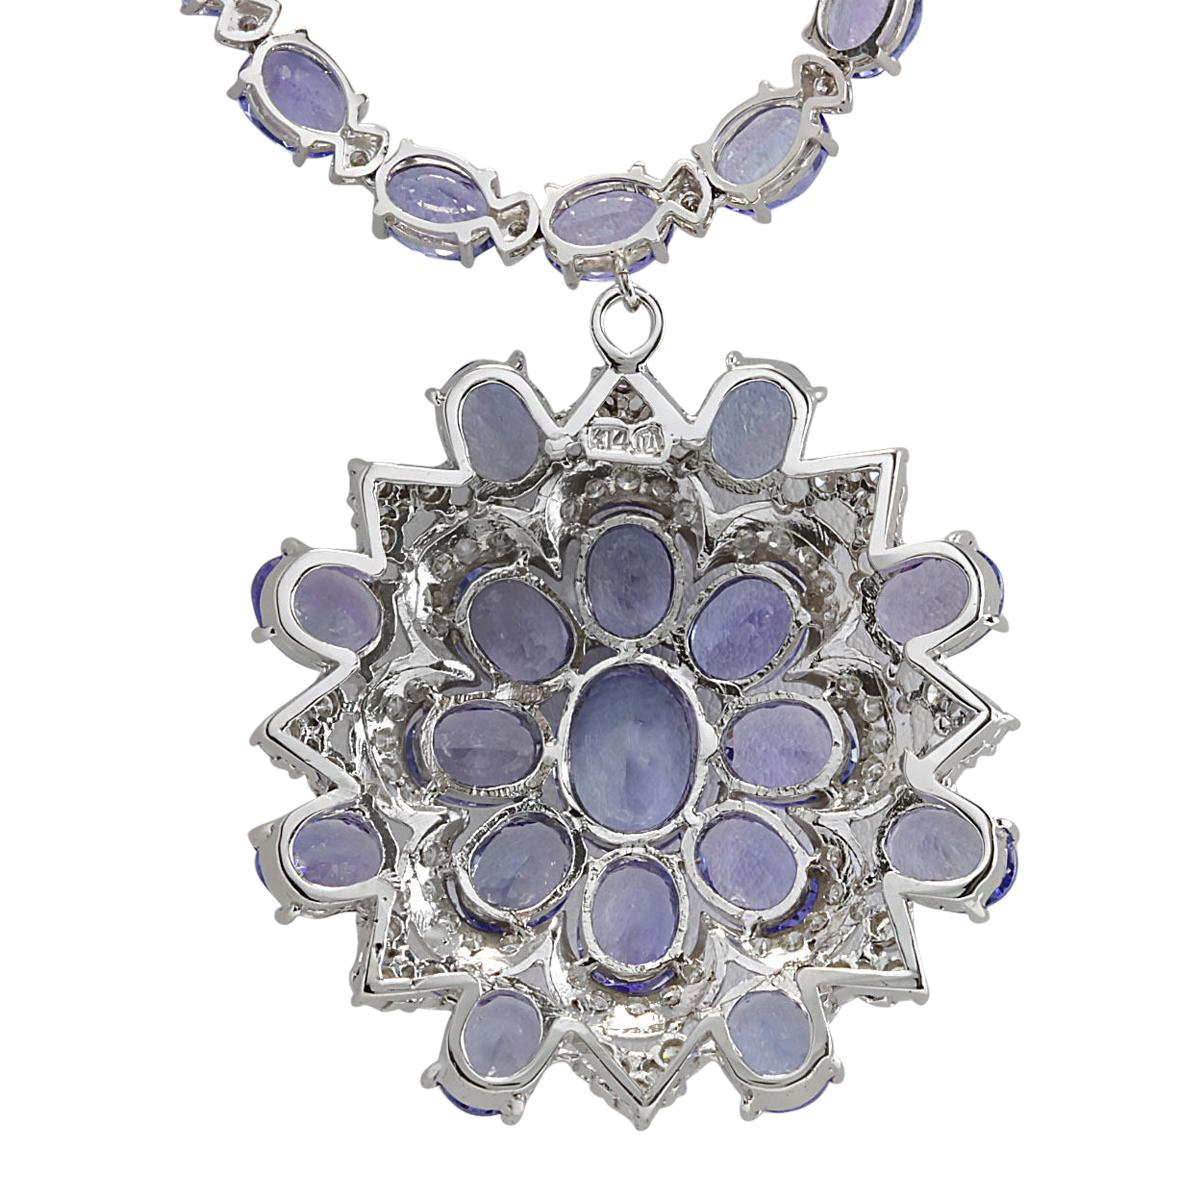 Stamped: 18K White Gold

Total Necklace Weight: 39.6 Grams

Necklace Length: 17 Inches

Necklace Width: N/A

Gemstone Weight: Total  Center Tanzanite Weight is 3.83 Carat (Measures: 11.20x8.57 mm)

Color: Blue

Gemstone Weight: Total  Side Tanzanite